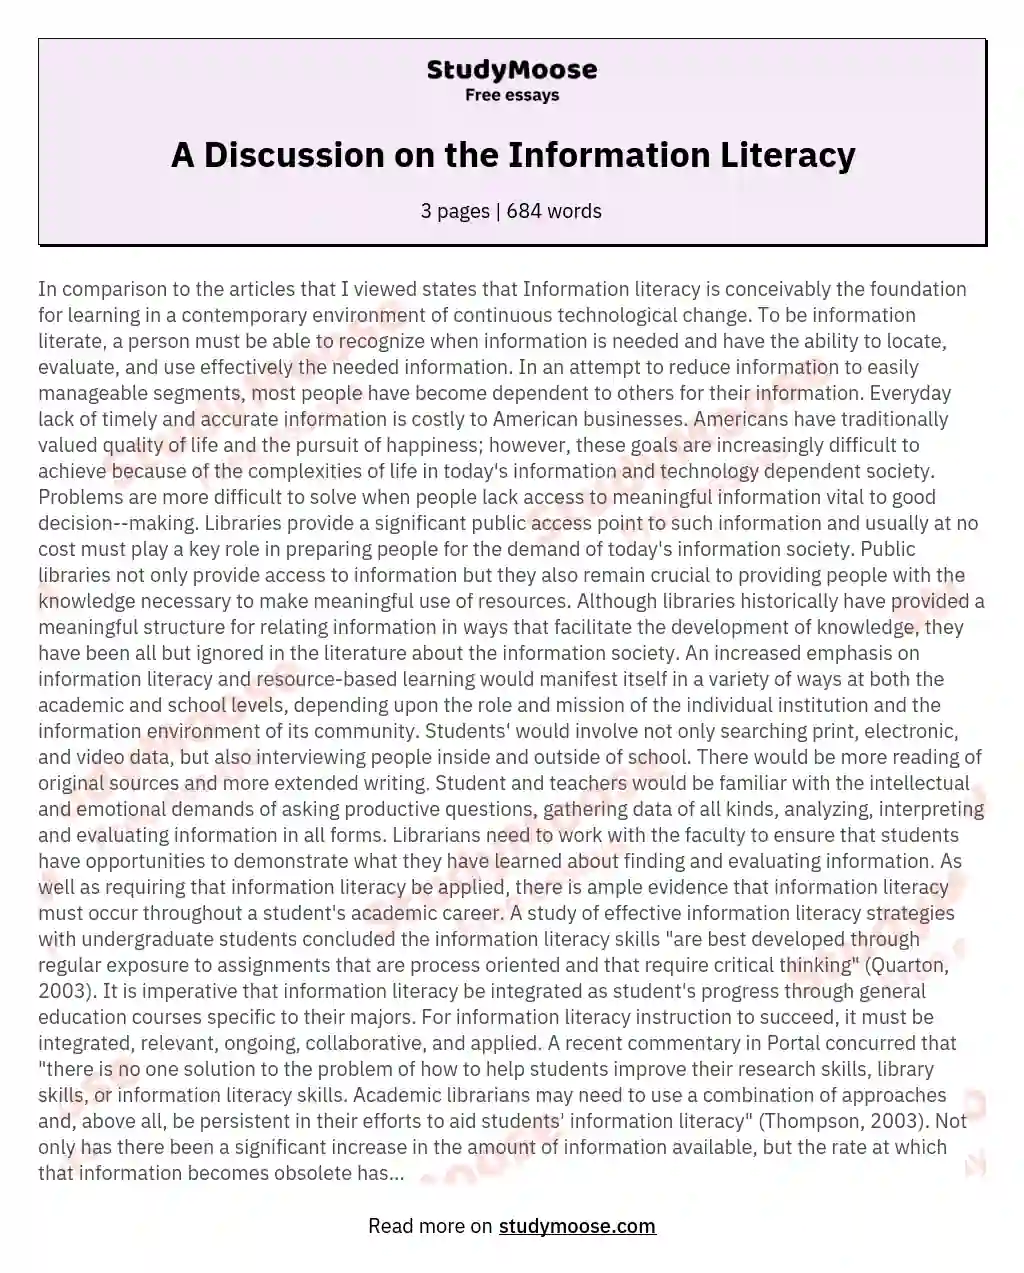 A Discussion on the Information Literacy essay